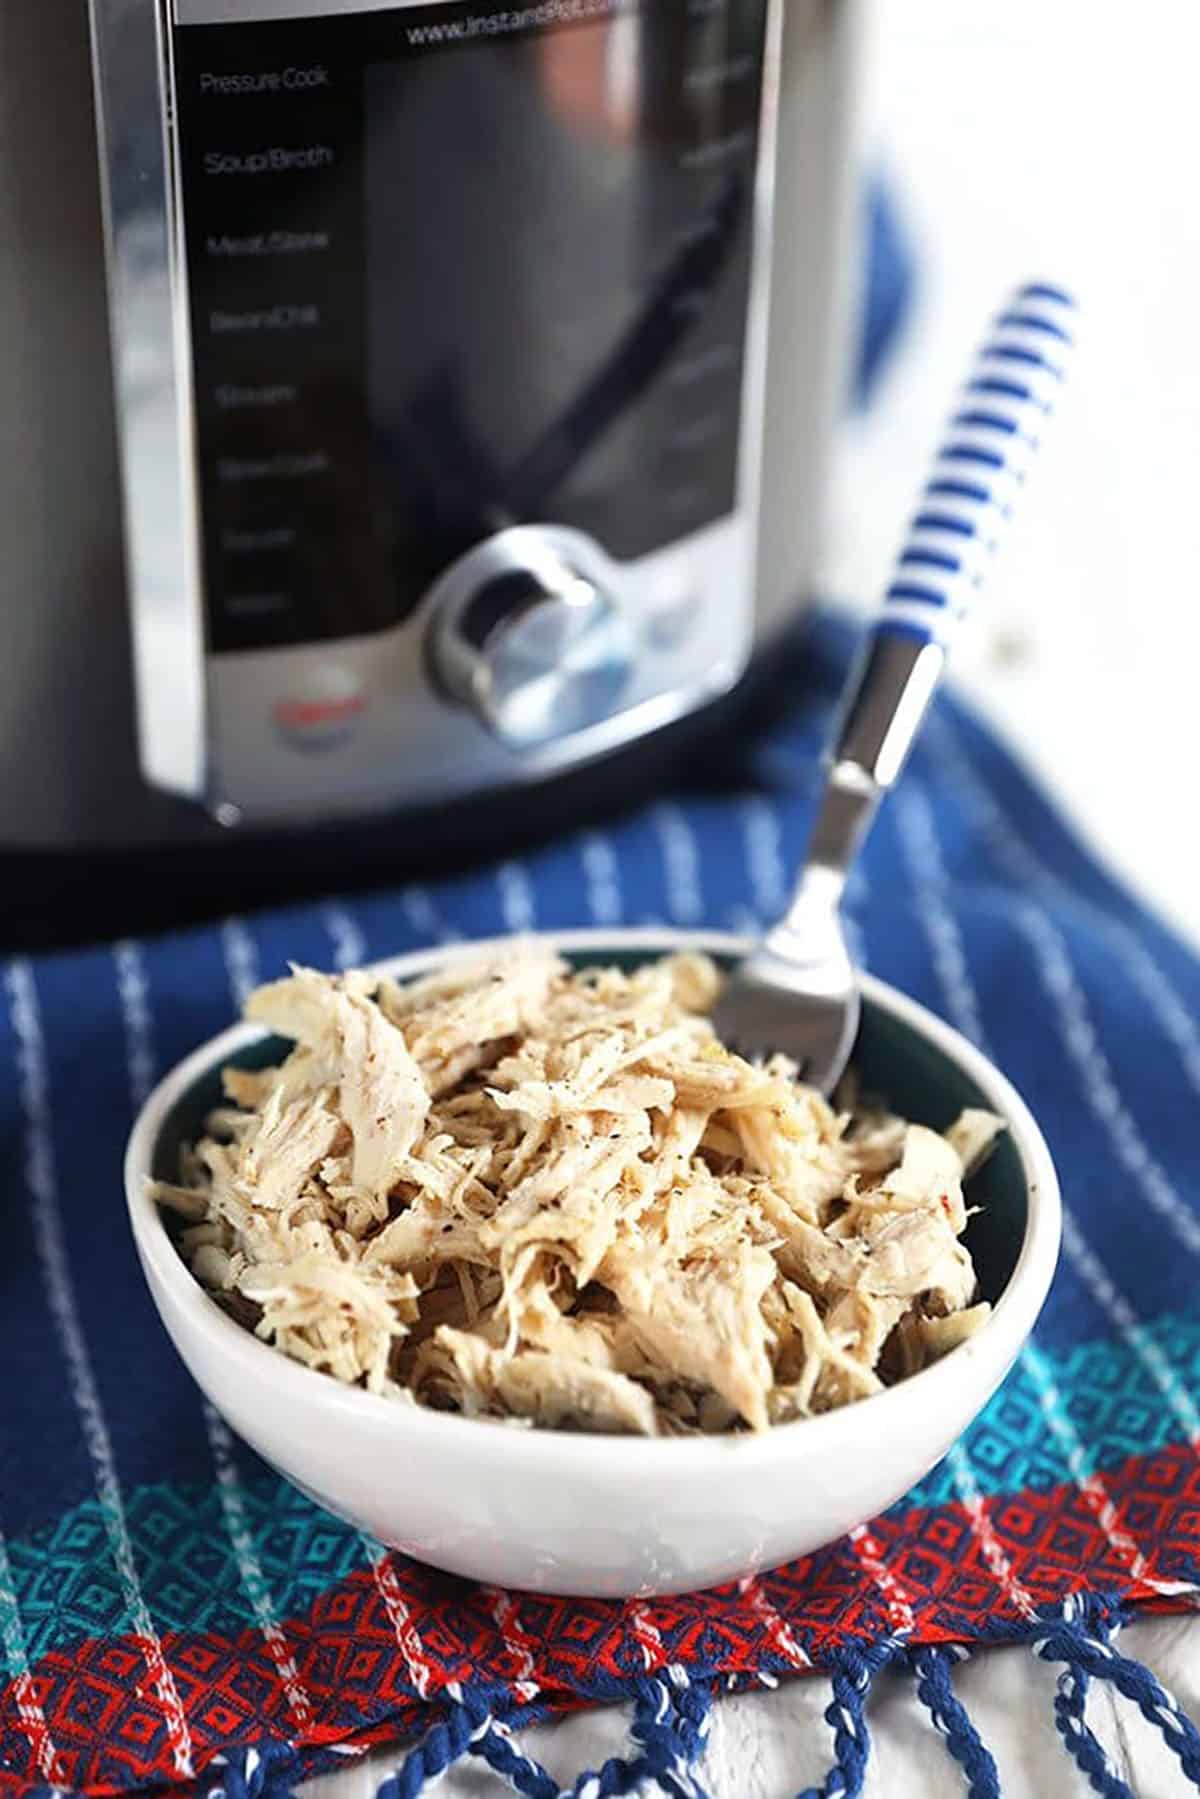 Shredded chicken breast in a white bowl with a blue and white fork.